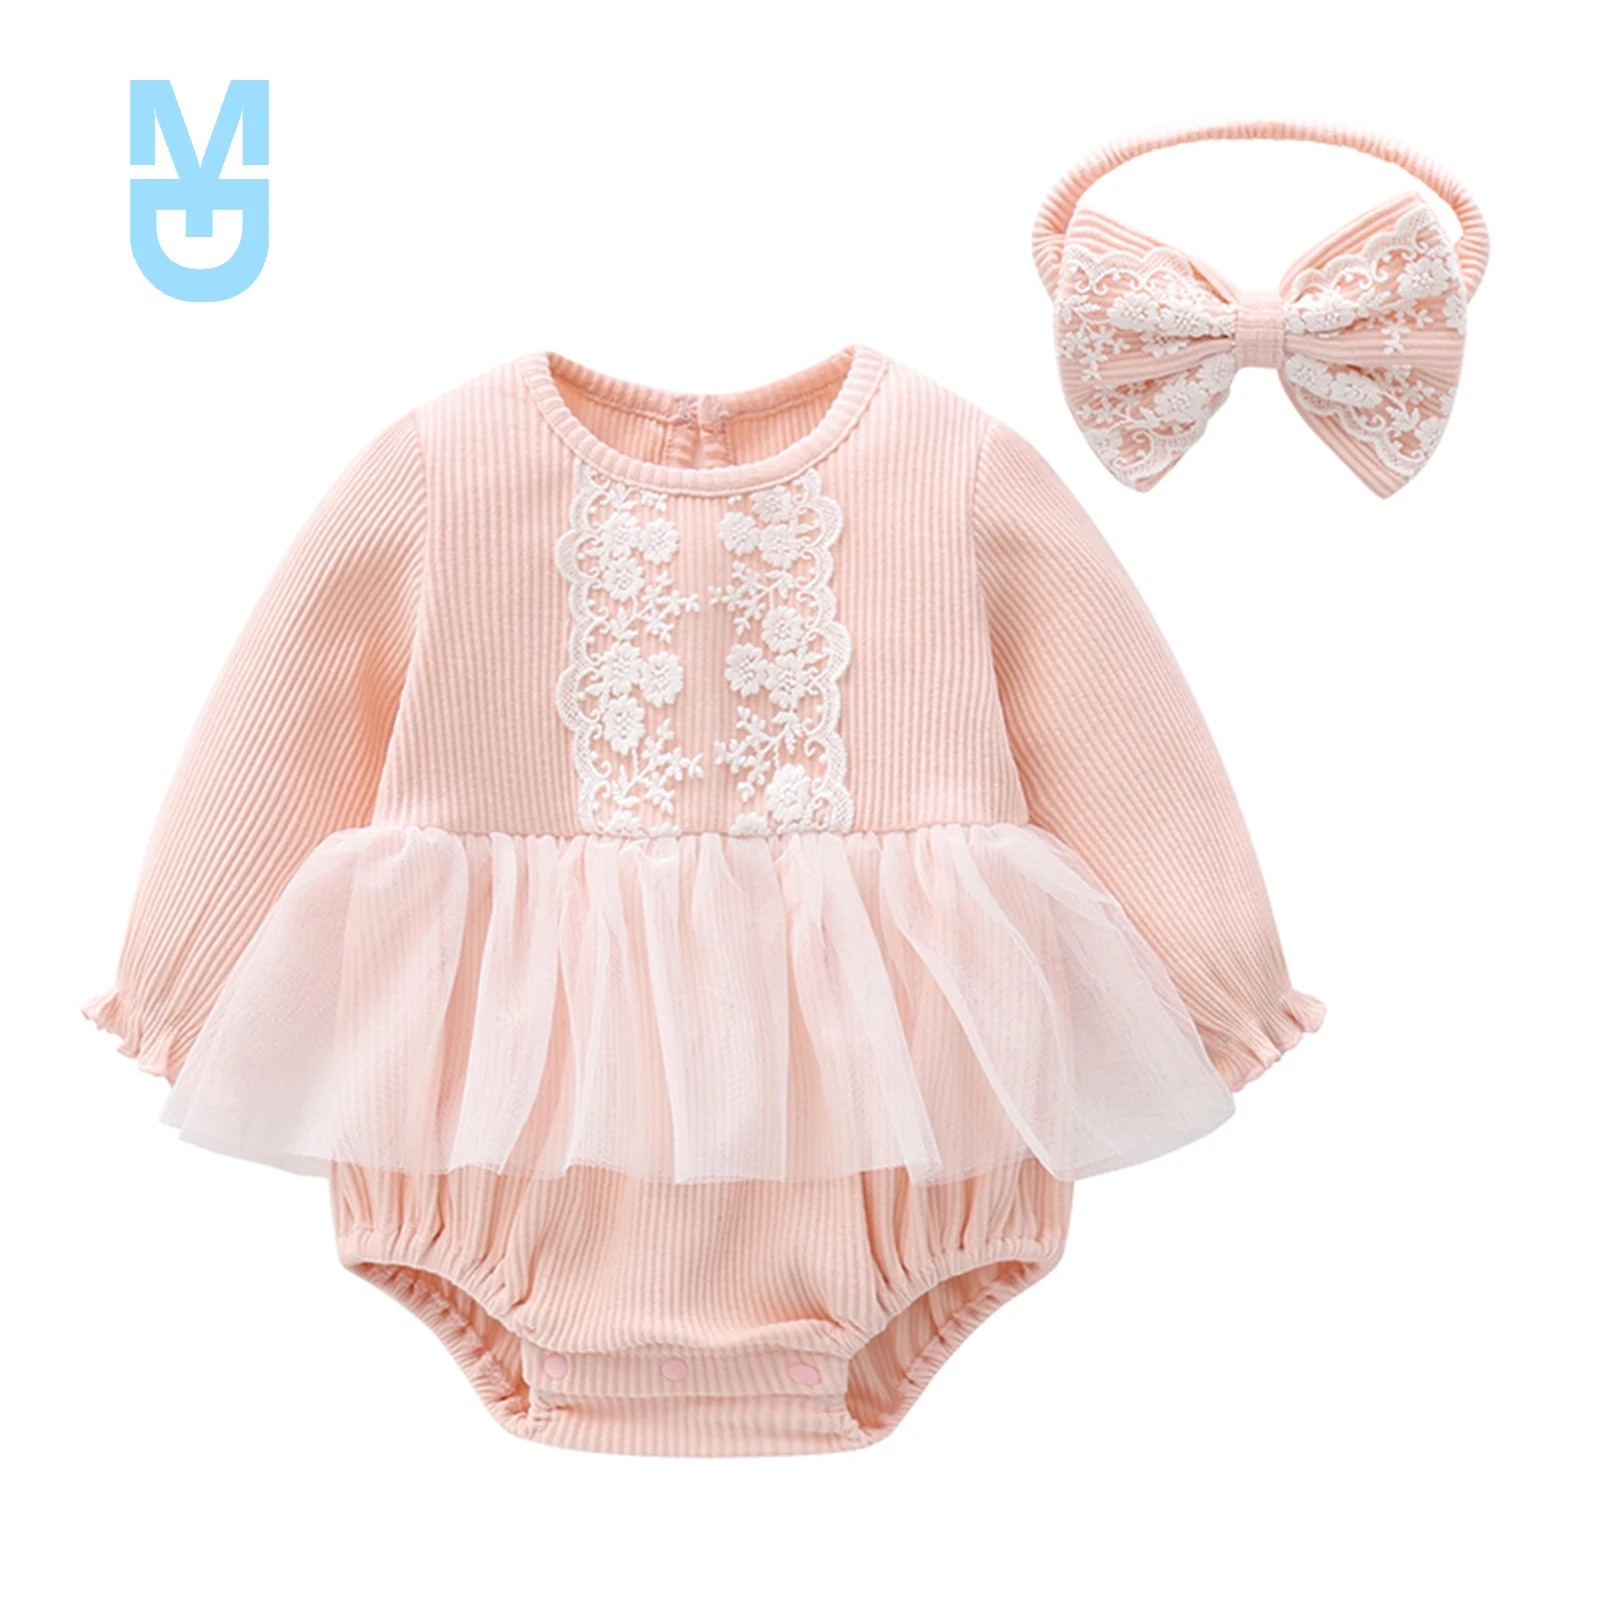 

New Autumn born Baby Girl Long Sleeve Lace Romper Jumpsuit Tutu Bodysuit+Headband Outfits Clothes 0-24M